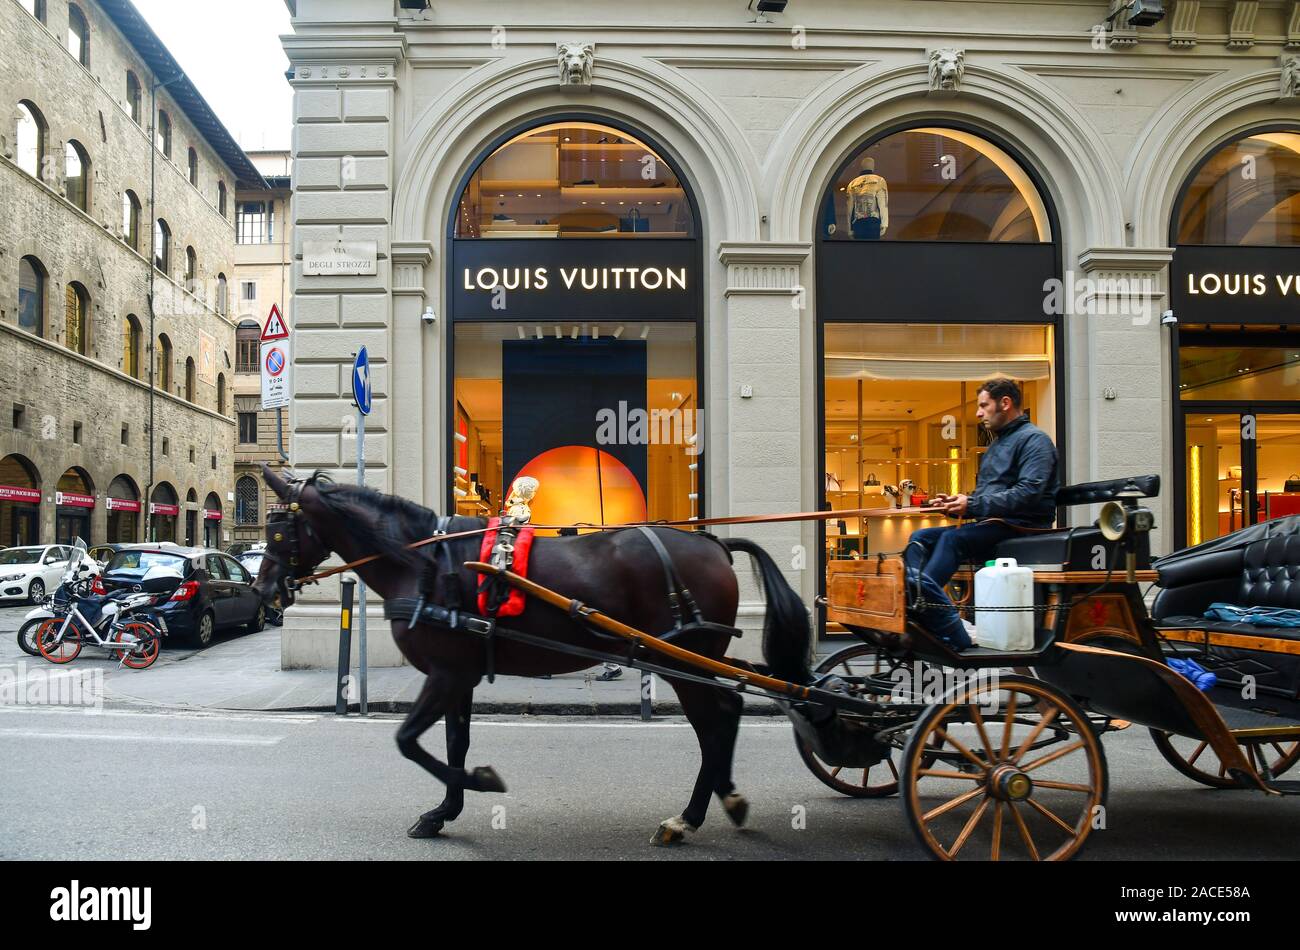 Horse-drawn carriage passing in front of the Louis Vuitton boutique, famous high-fashion house, in the historic centre of Florence, Tuscany, Italy Stock Photo